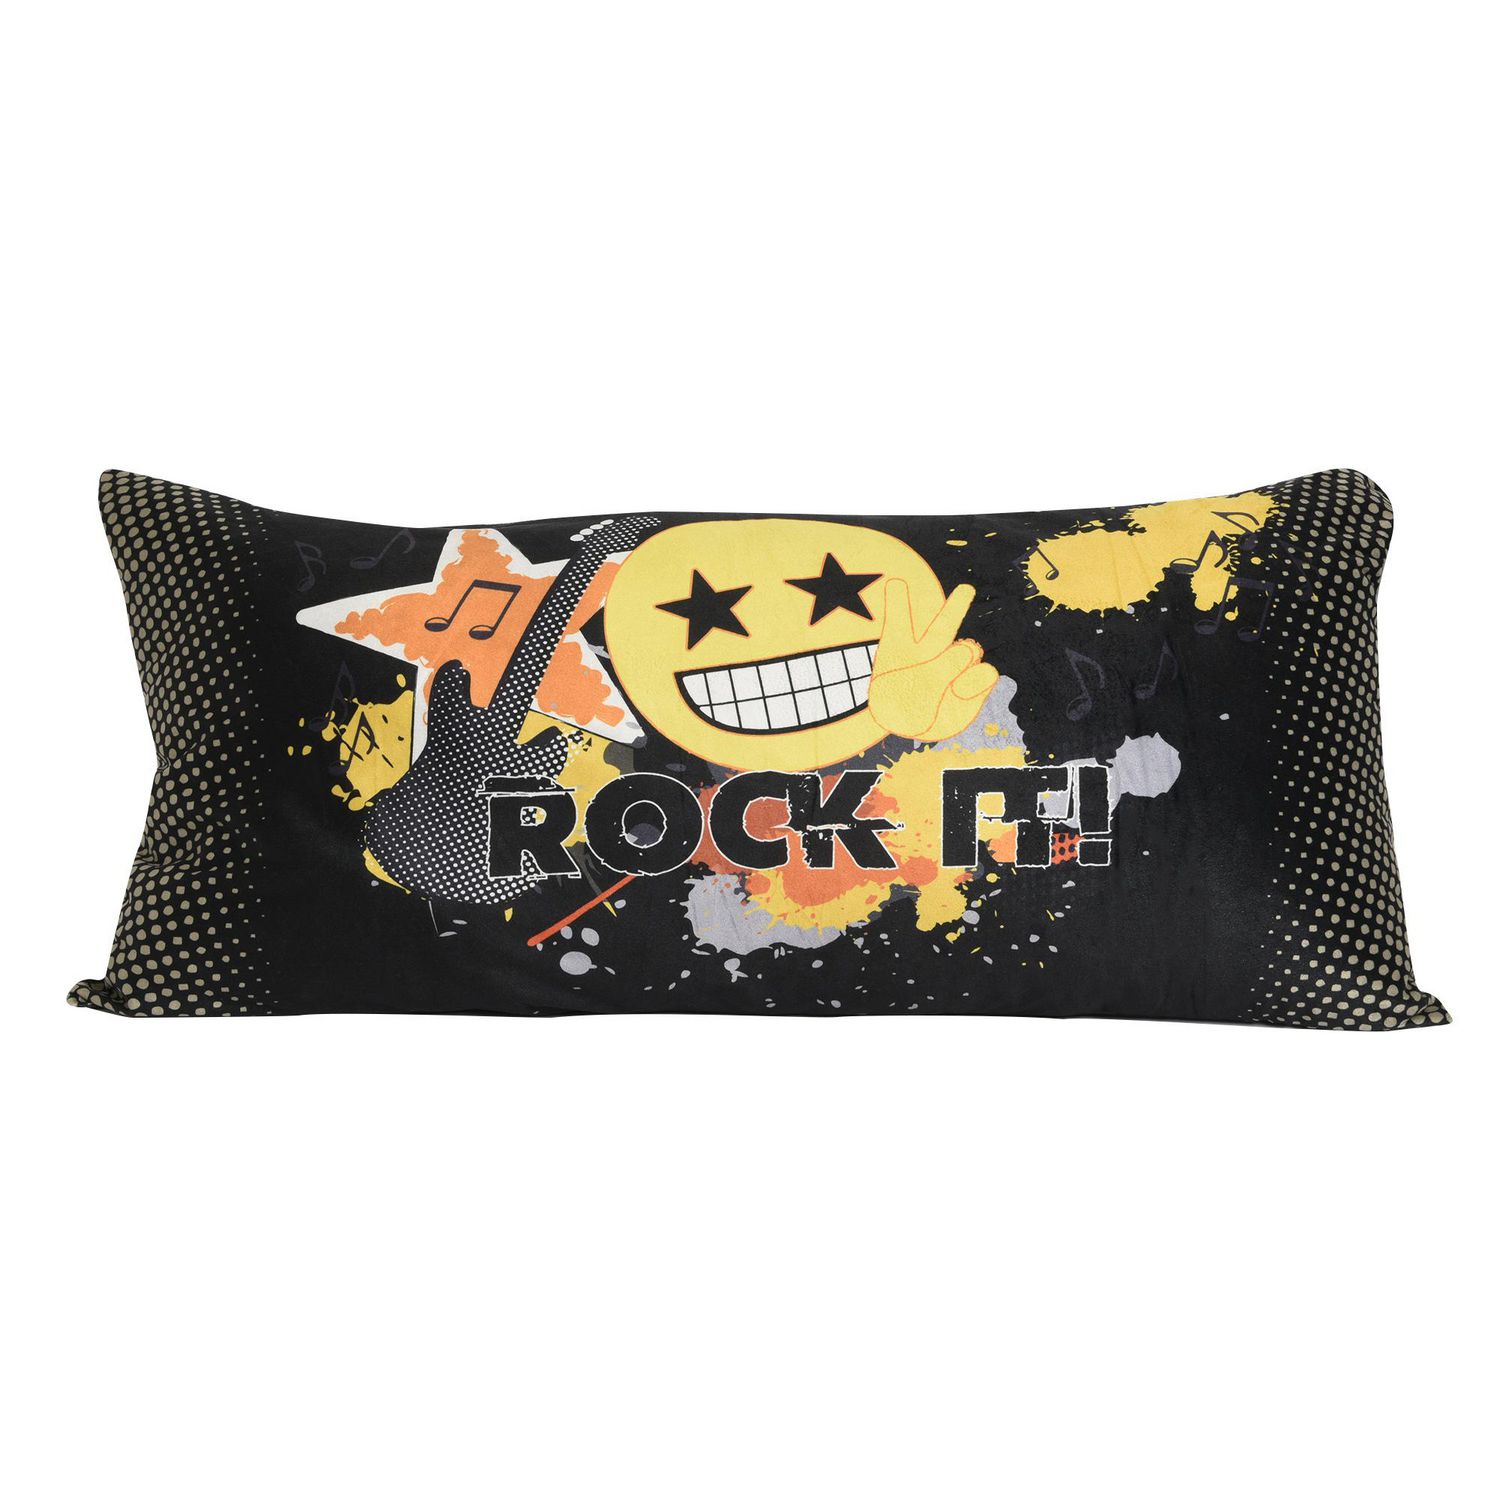 Rock On character pillow